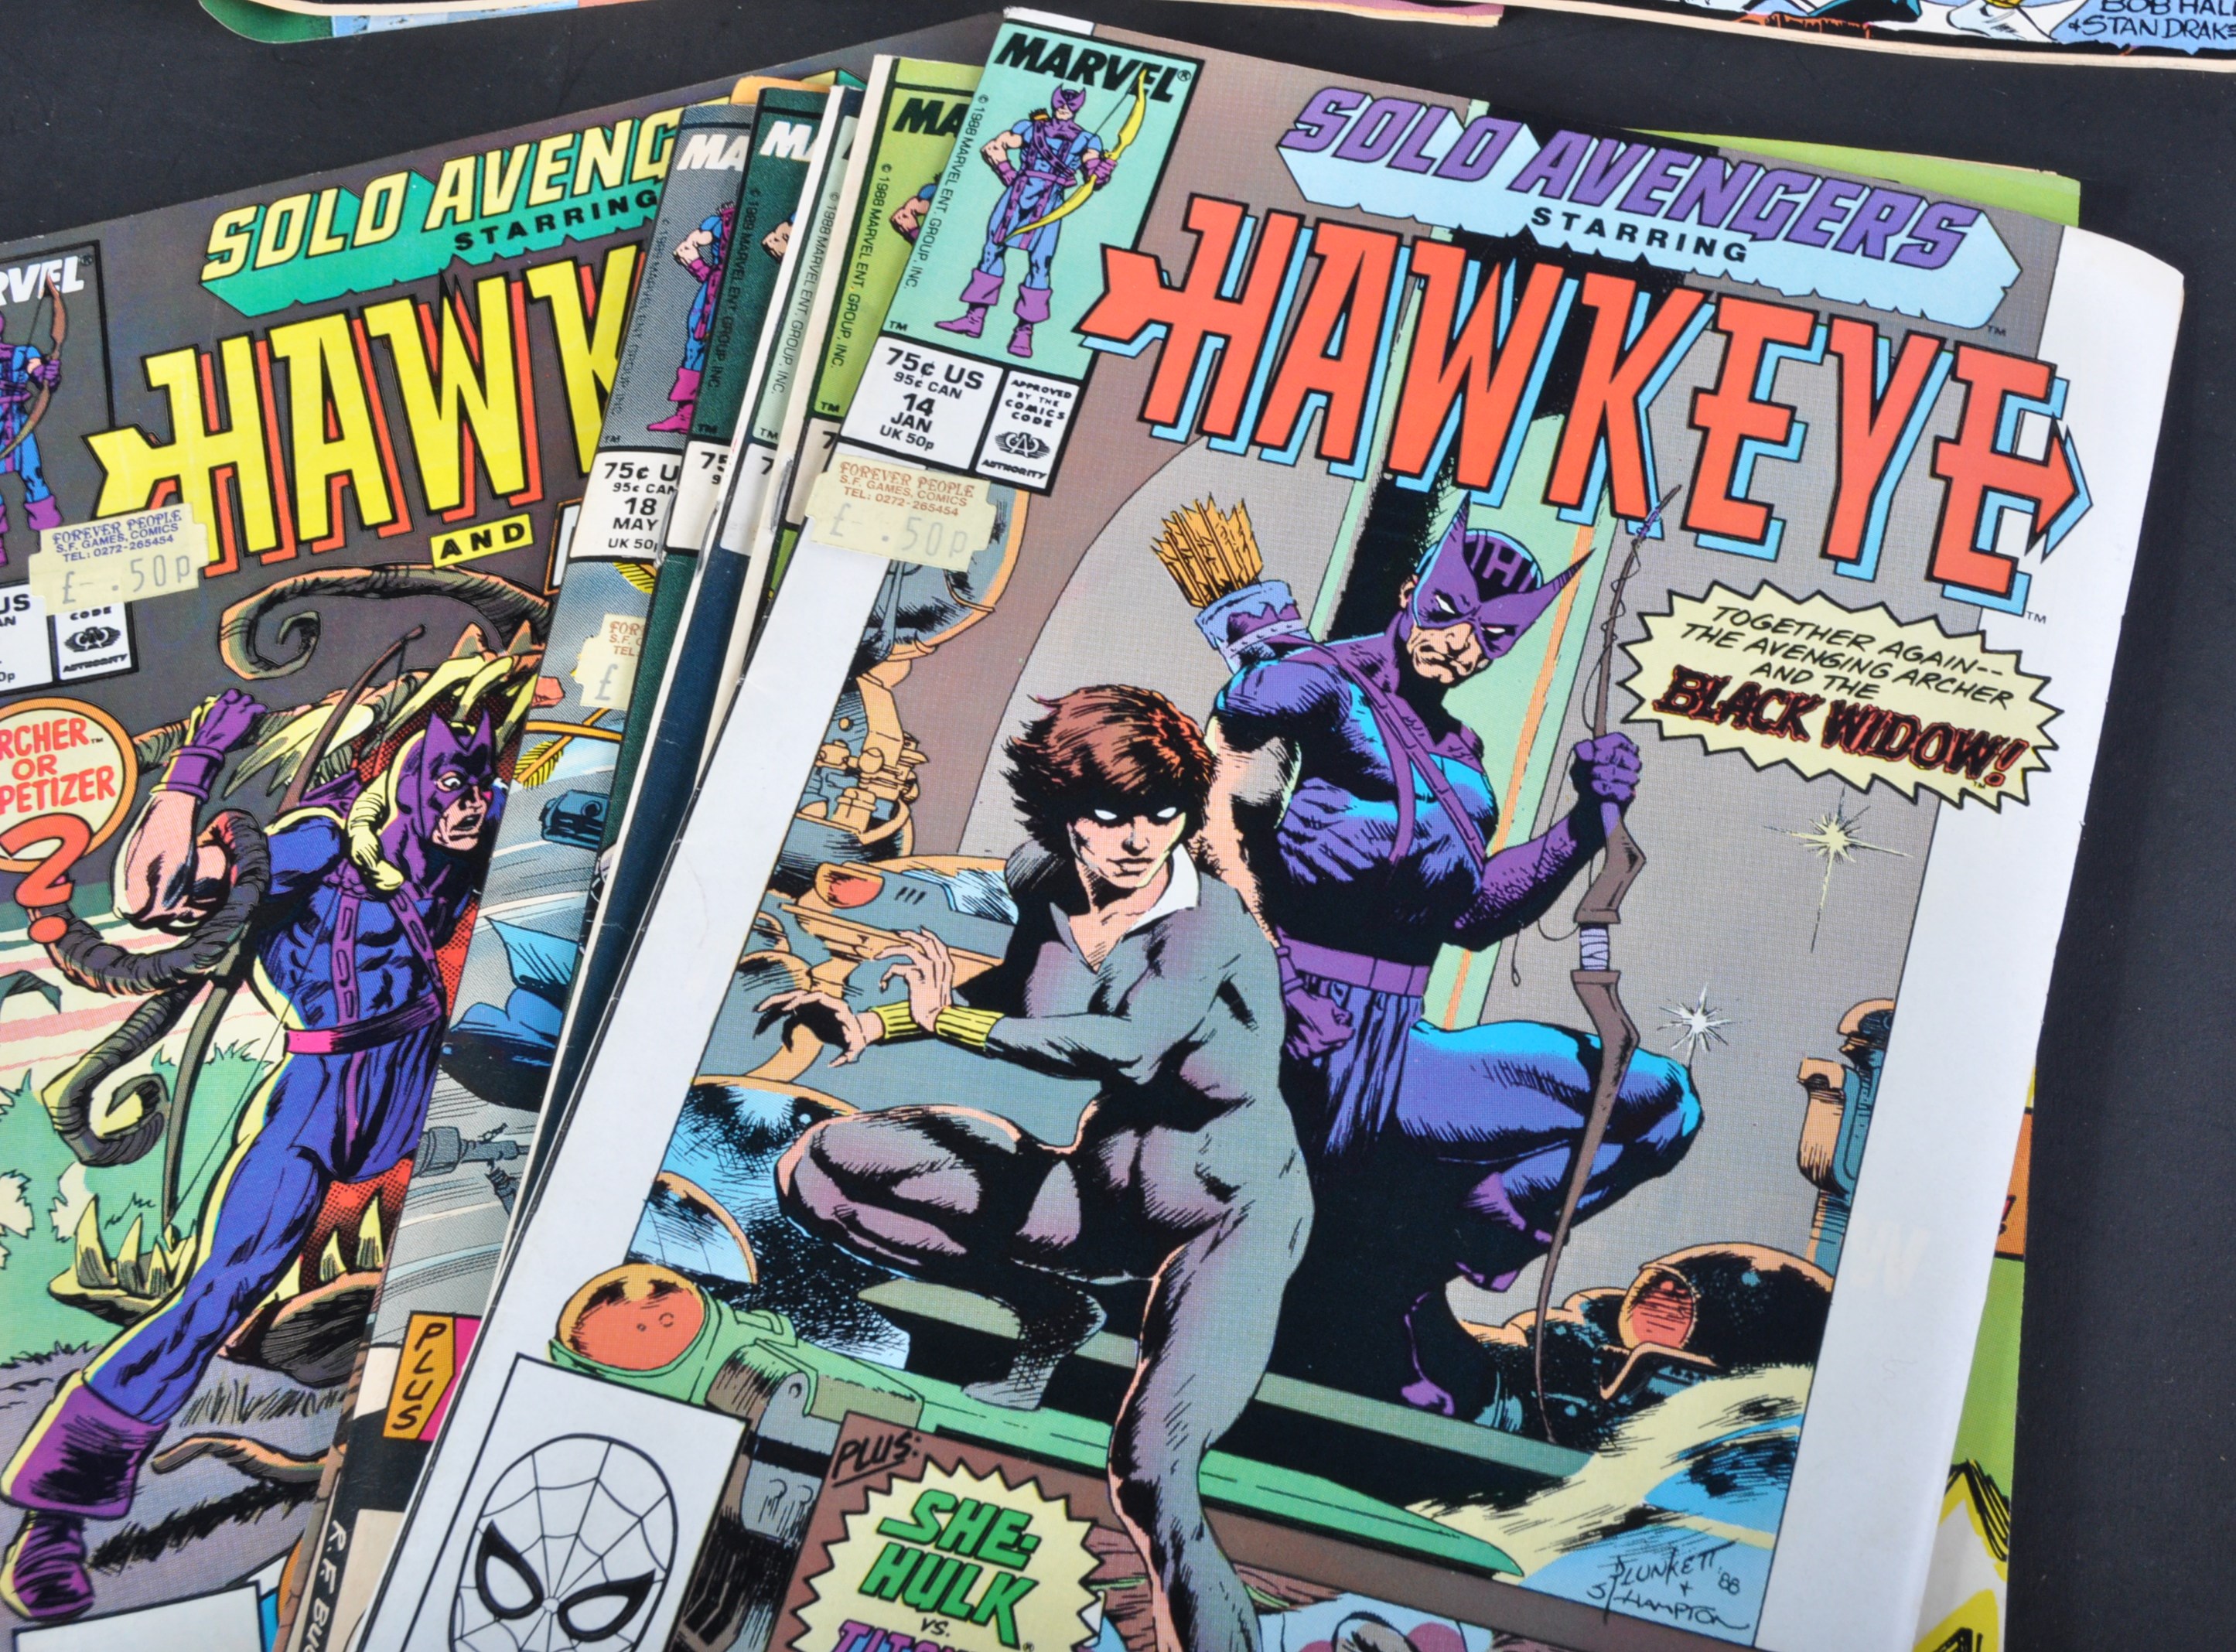 MARVEL COMICS - HAWKEYE - COLLECTION OF VINTAGE COMIC BOOKS - Image 9 of 9